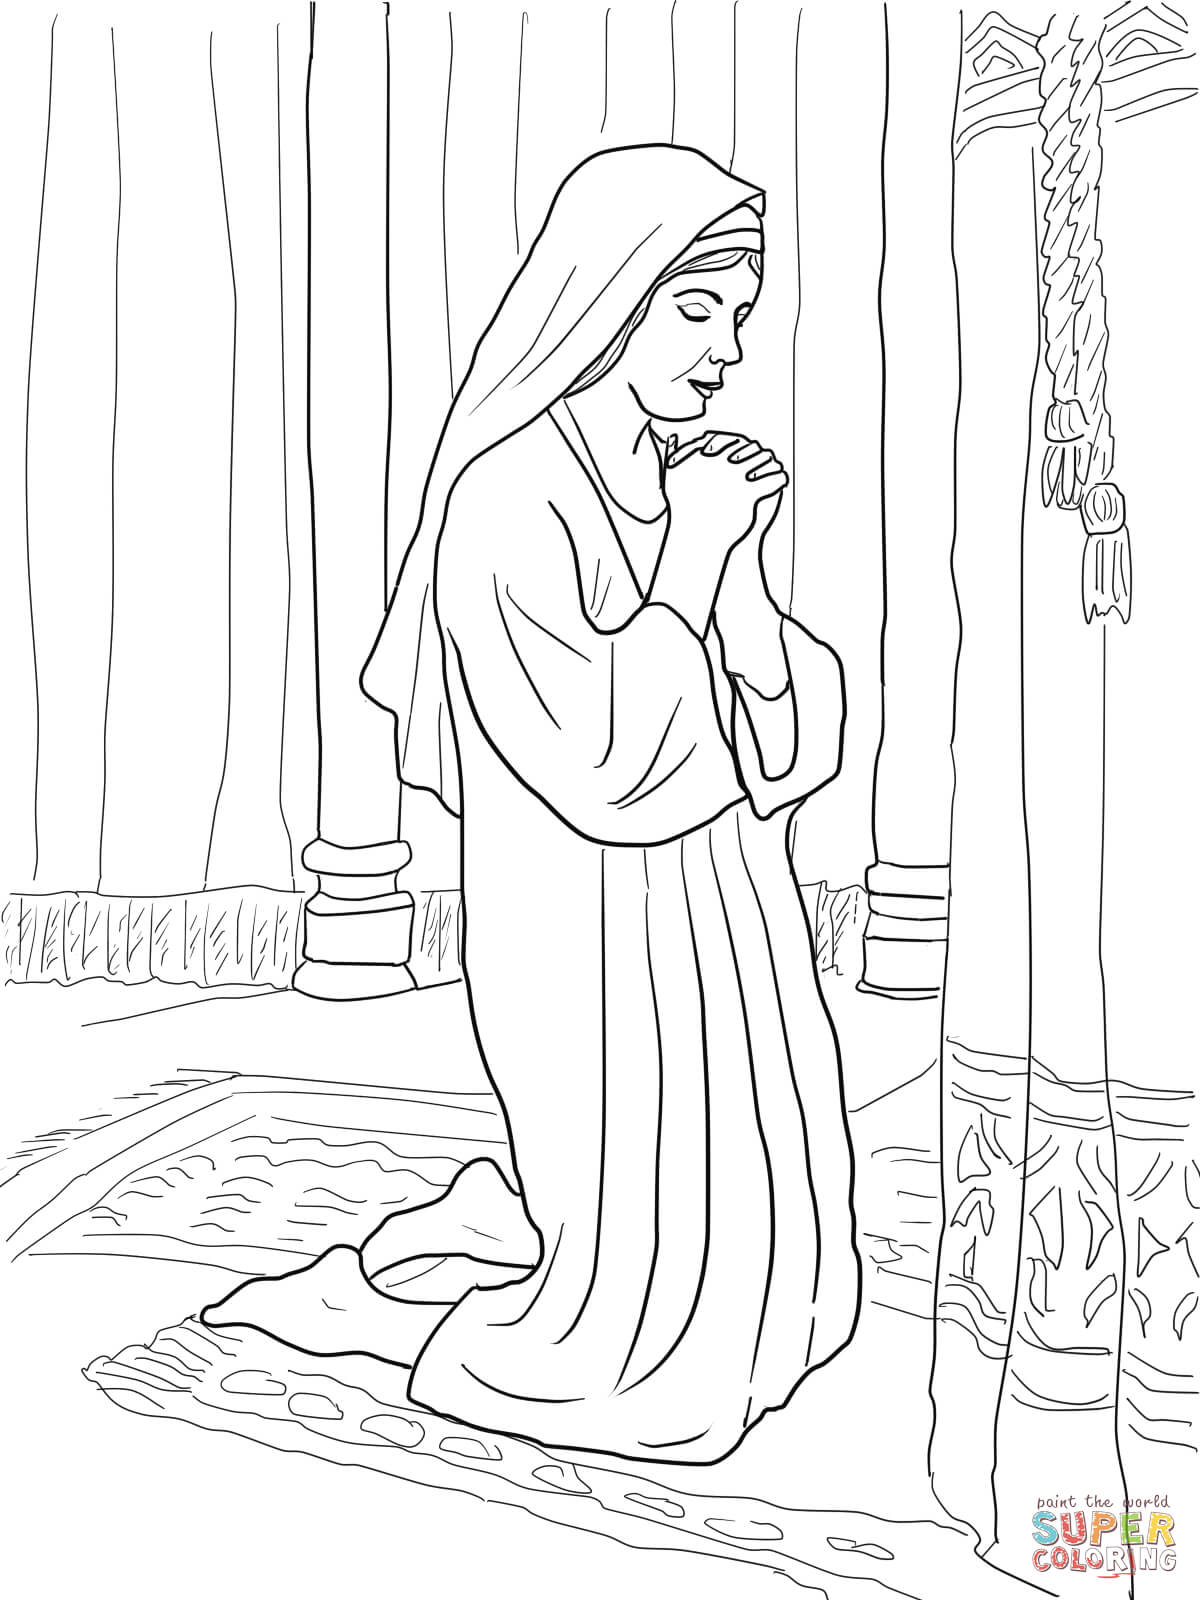 Hannah prays for a son coloring page free printable coloring pages